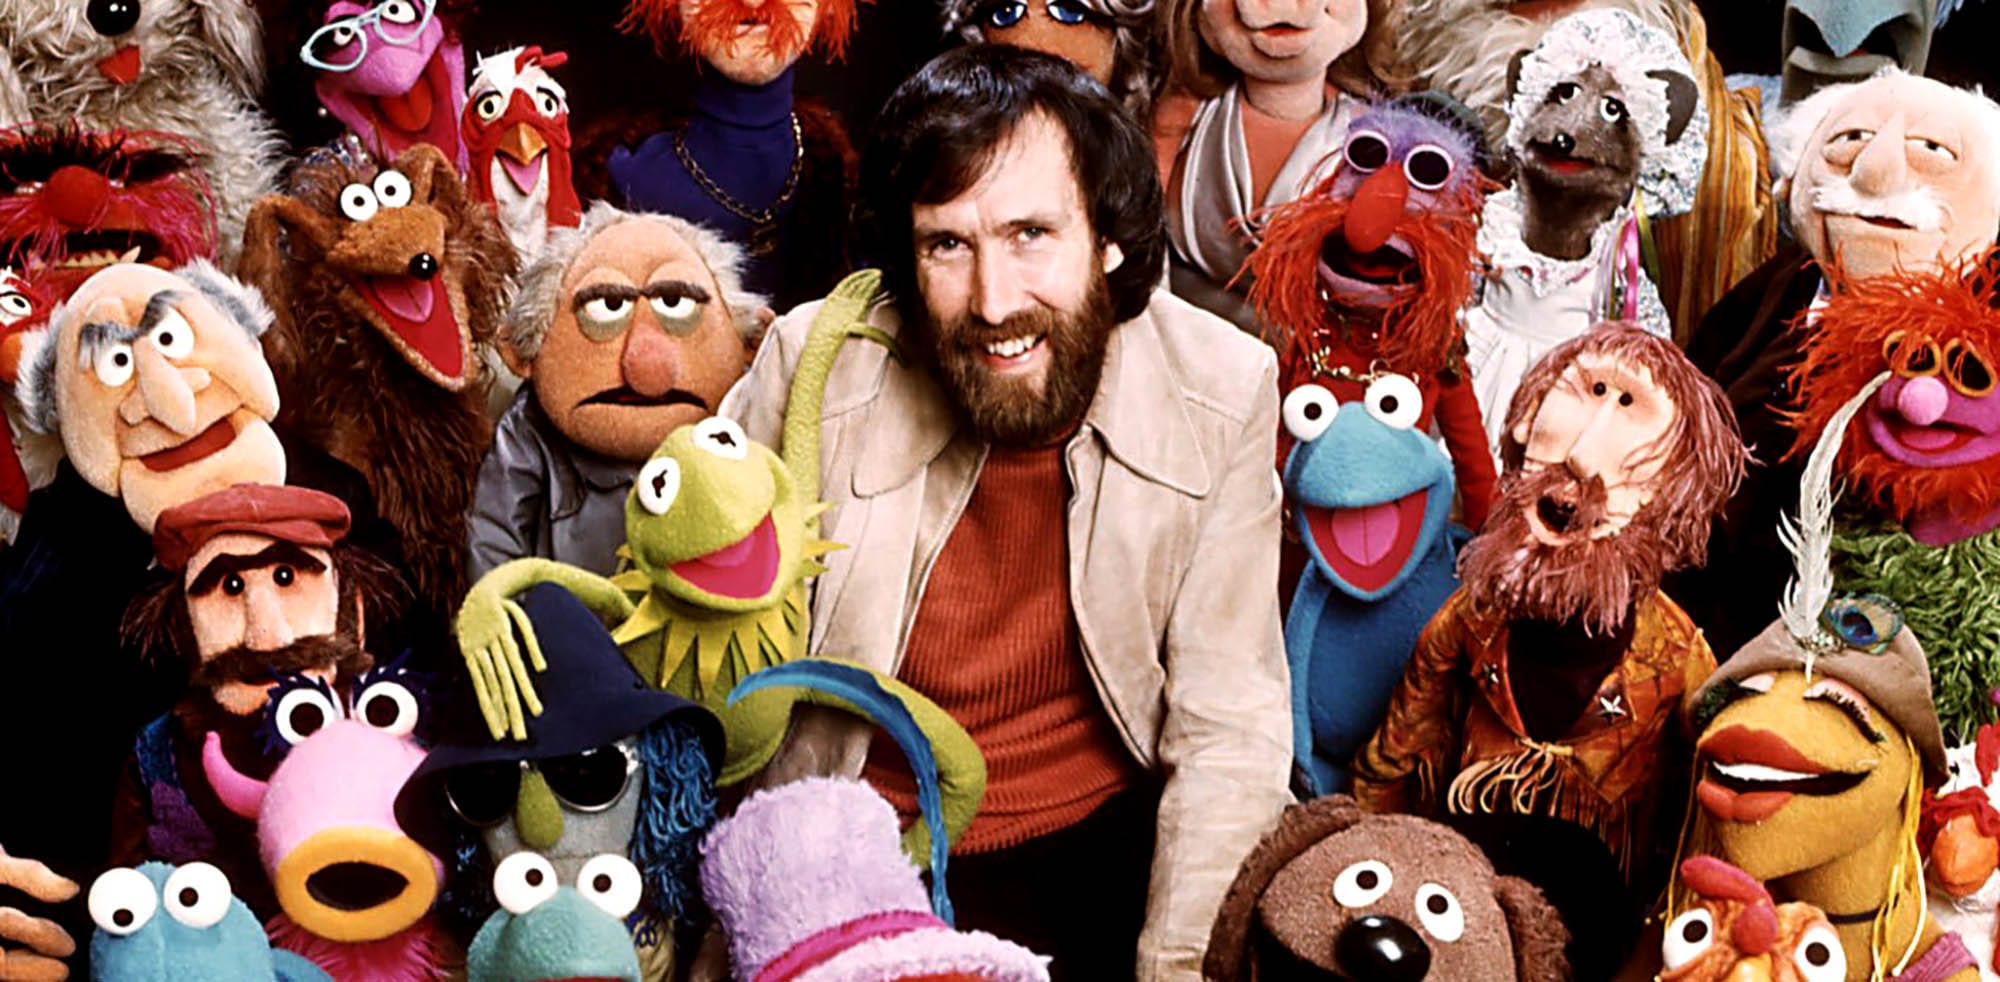 Musical numbers, screwball comedy, and chaotic chat show stylings: here are ten iconic Muppets moments which have left their imprint on modern comedy.